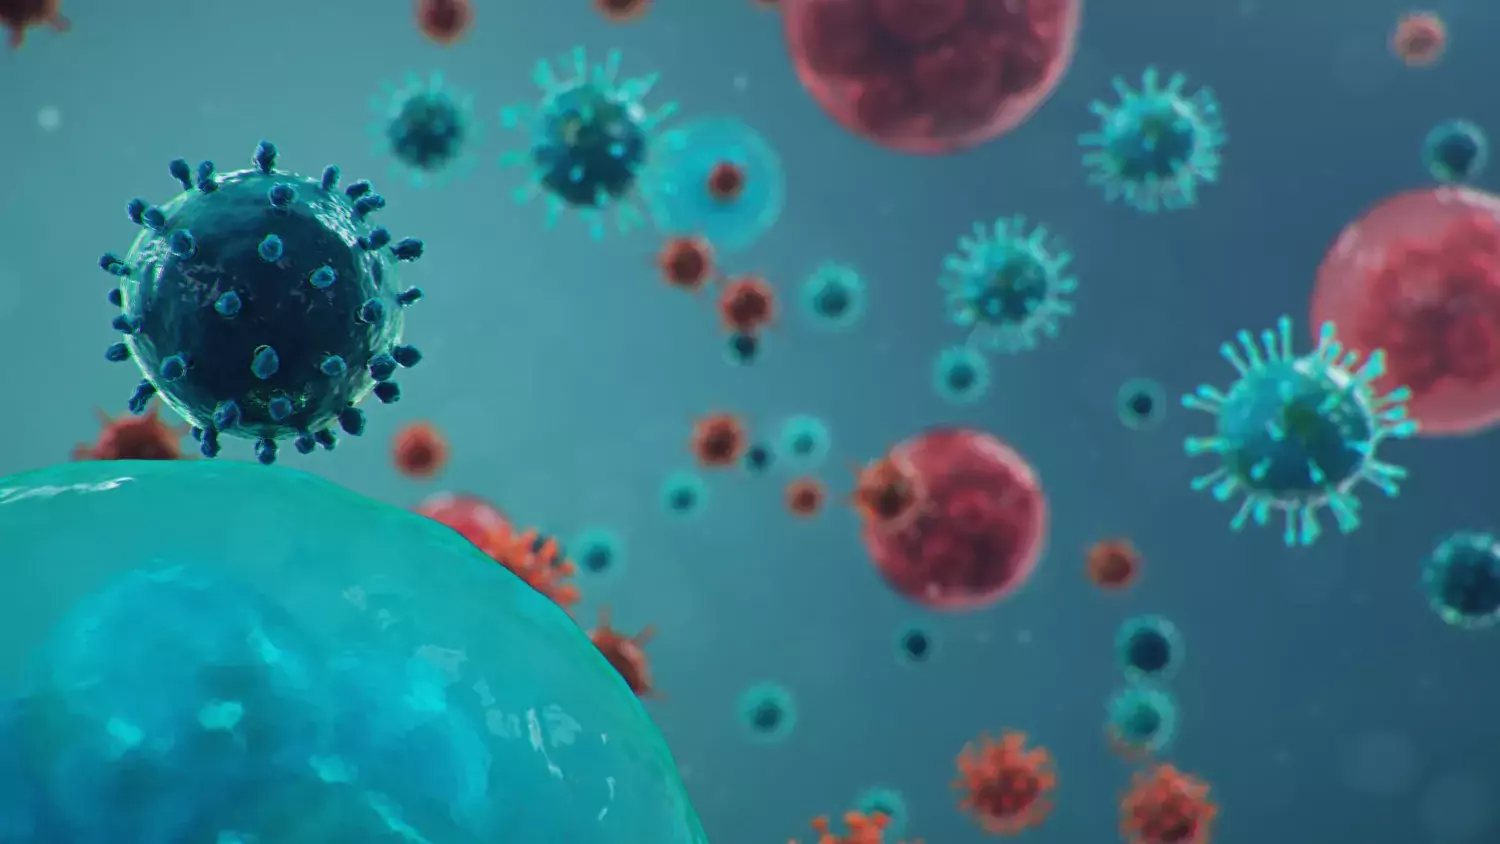 Human cells, the virus infects cells, 3D illustration.